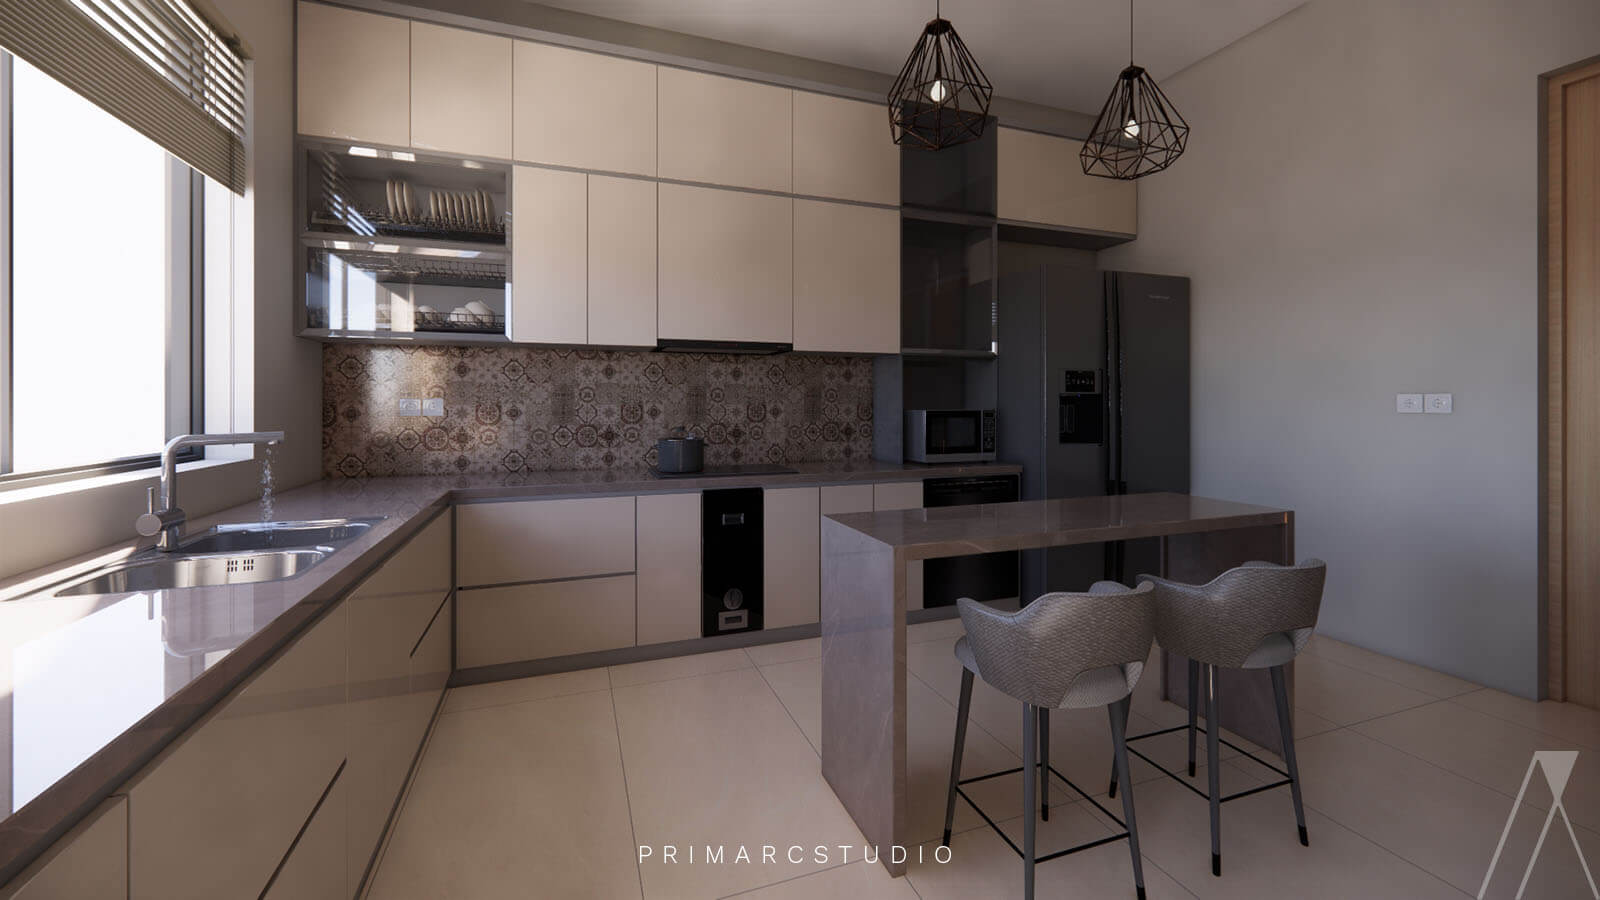 Kitchen interior design with island in the middle with chairs for breakfast